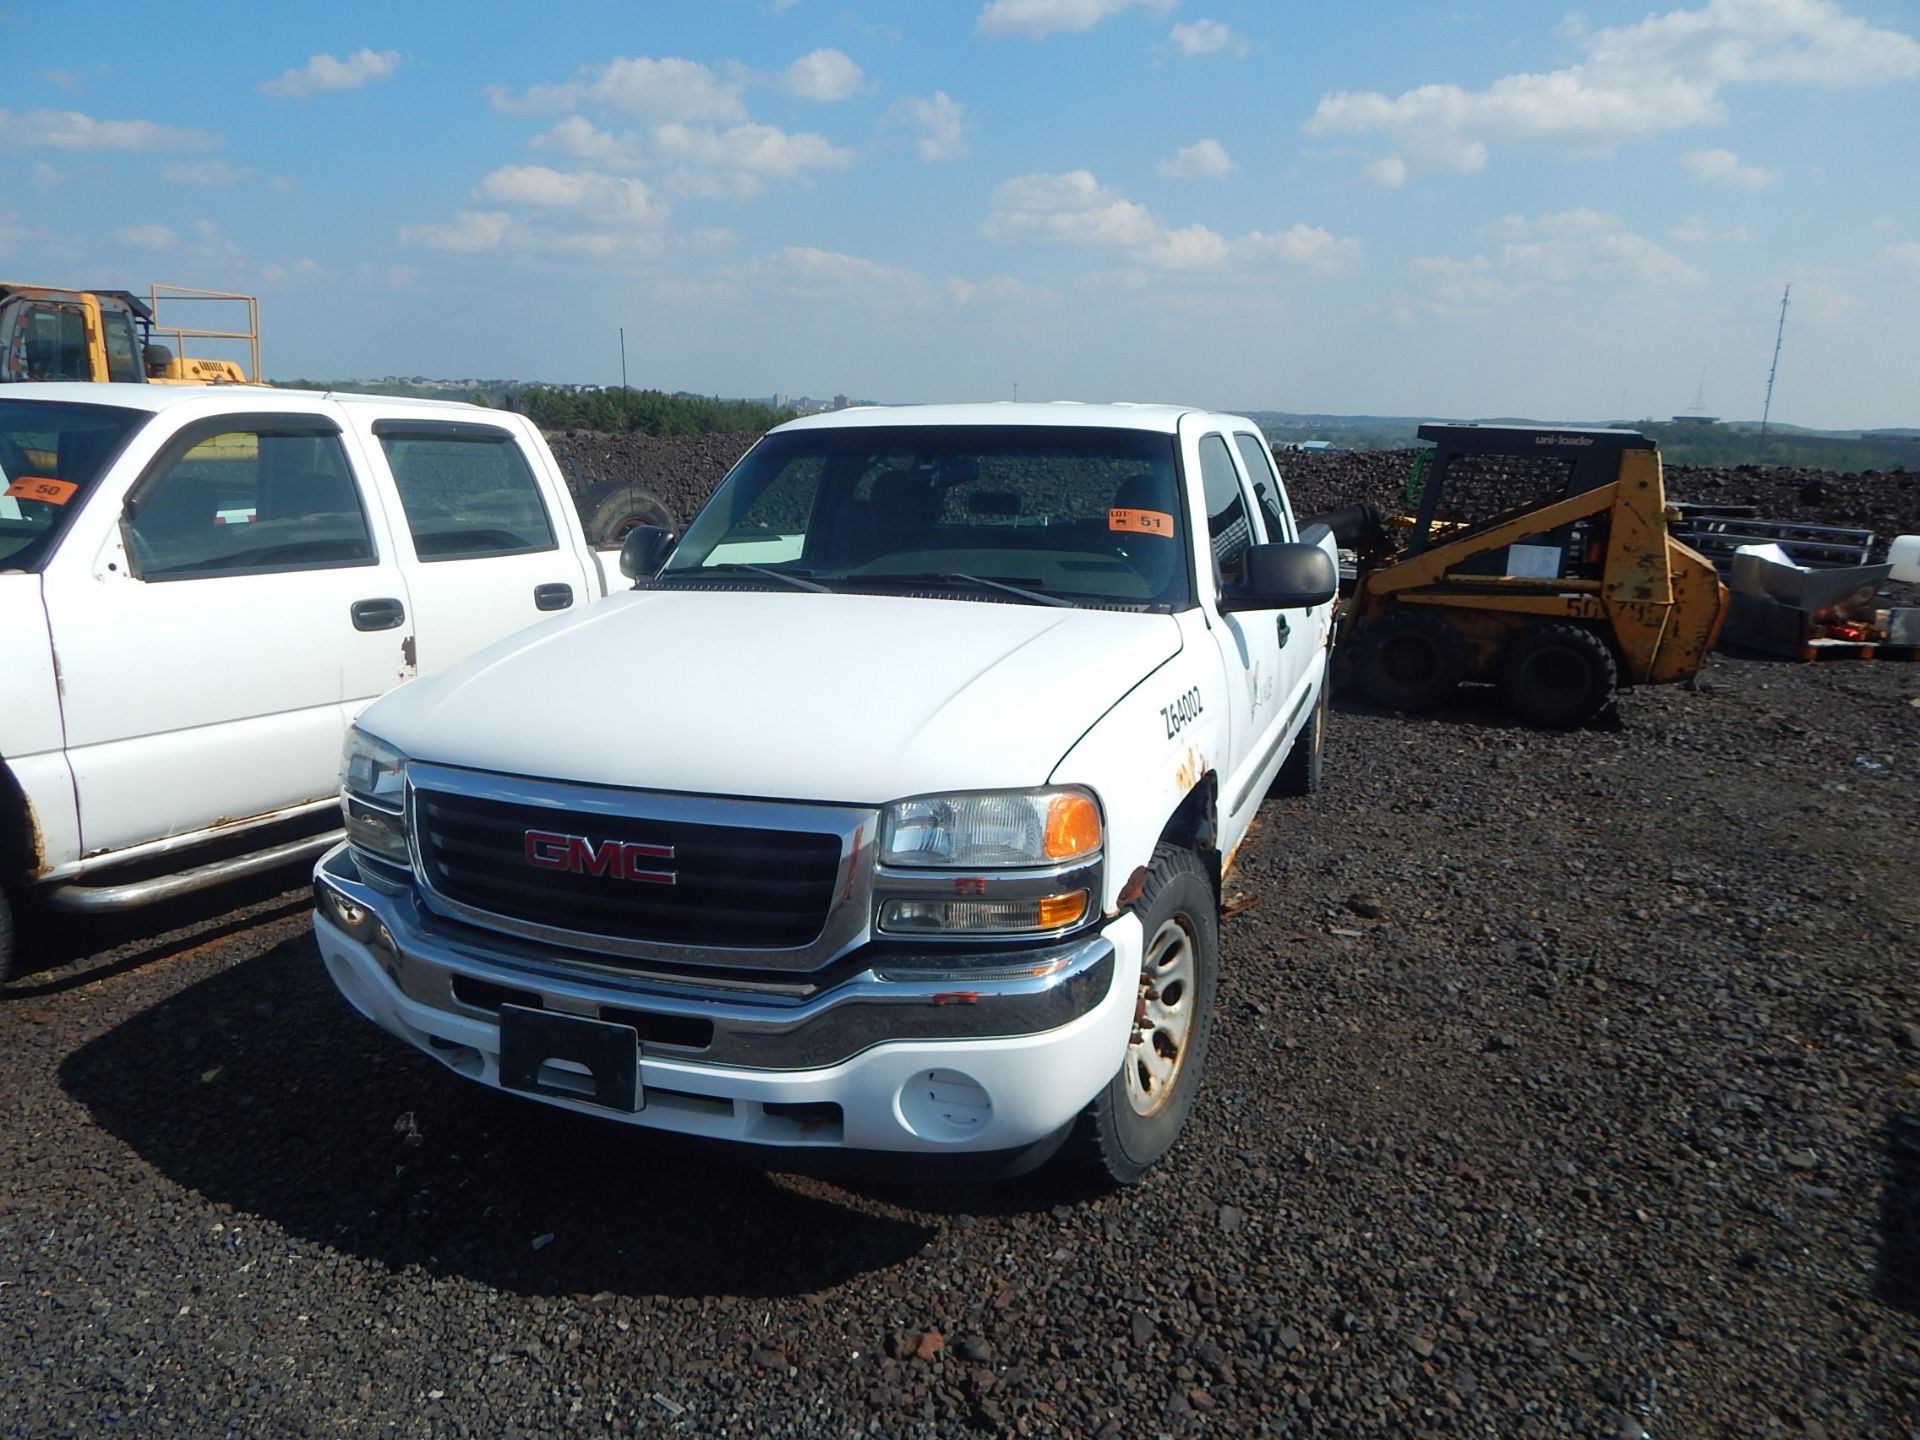 GMC SIERRA 1500 (2005) PICKUP TRUCK WITH V8 ENGINE, AUTOMATIC TRANSMISSION, 4X4, EXTENDED CAB VIN: